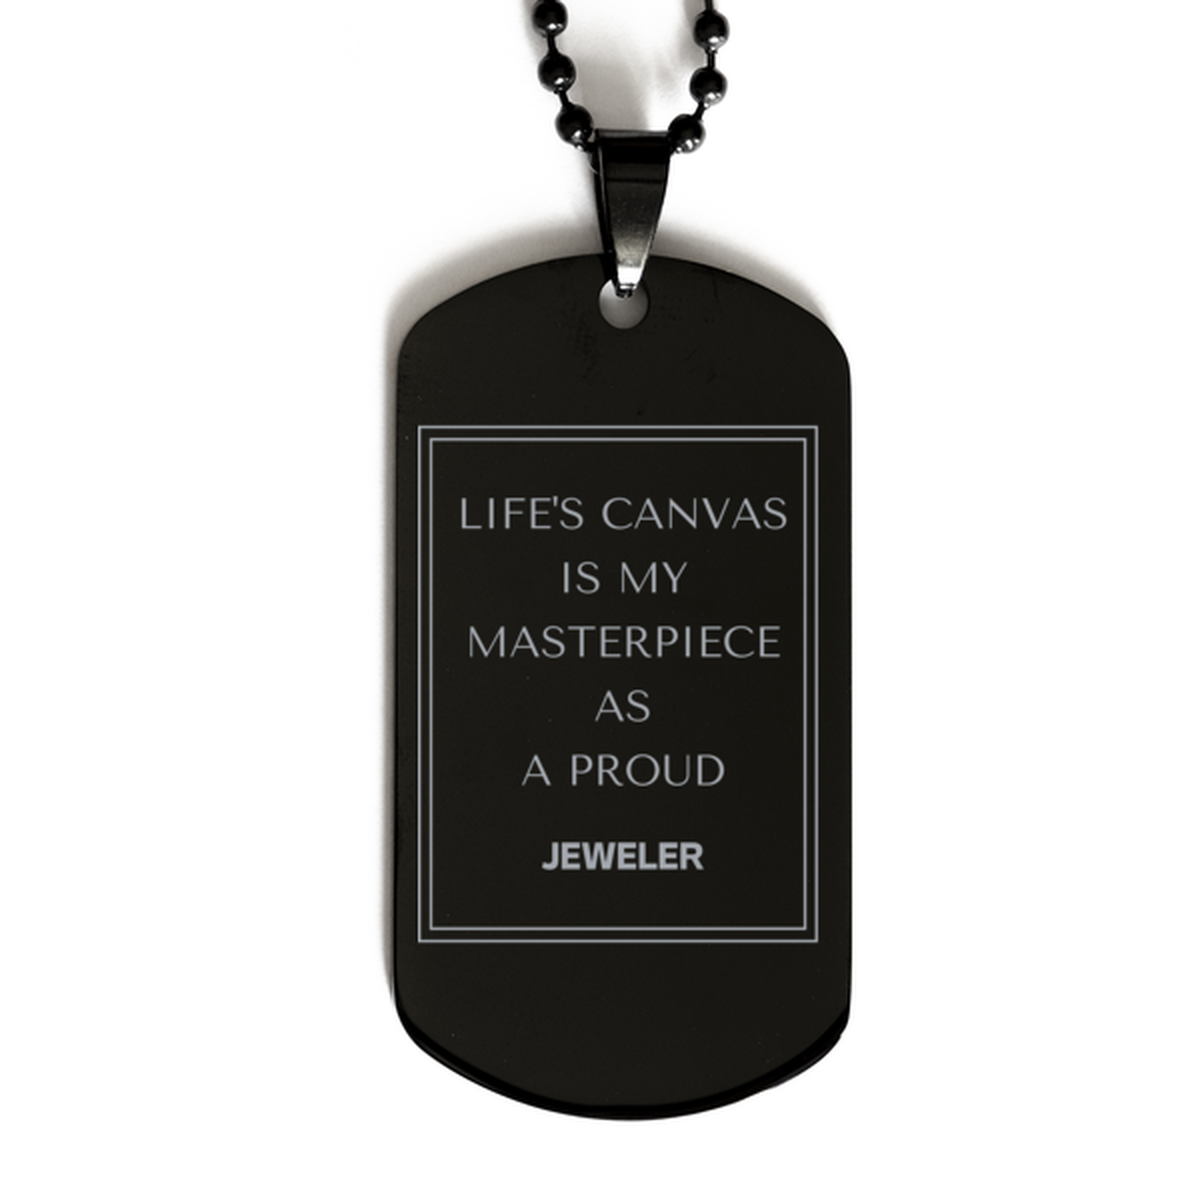 Proud Jeweler Gifts, Life's canvas is my masterpiece, Epic Birthday Christmas Unique Black Dog Tag For Jeweler, Coworkers, Men, Women, Friends